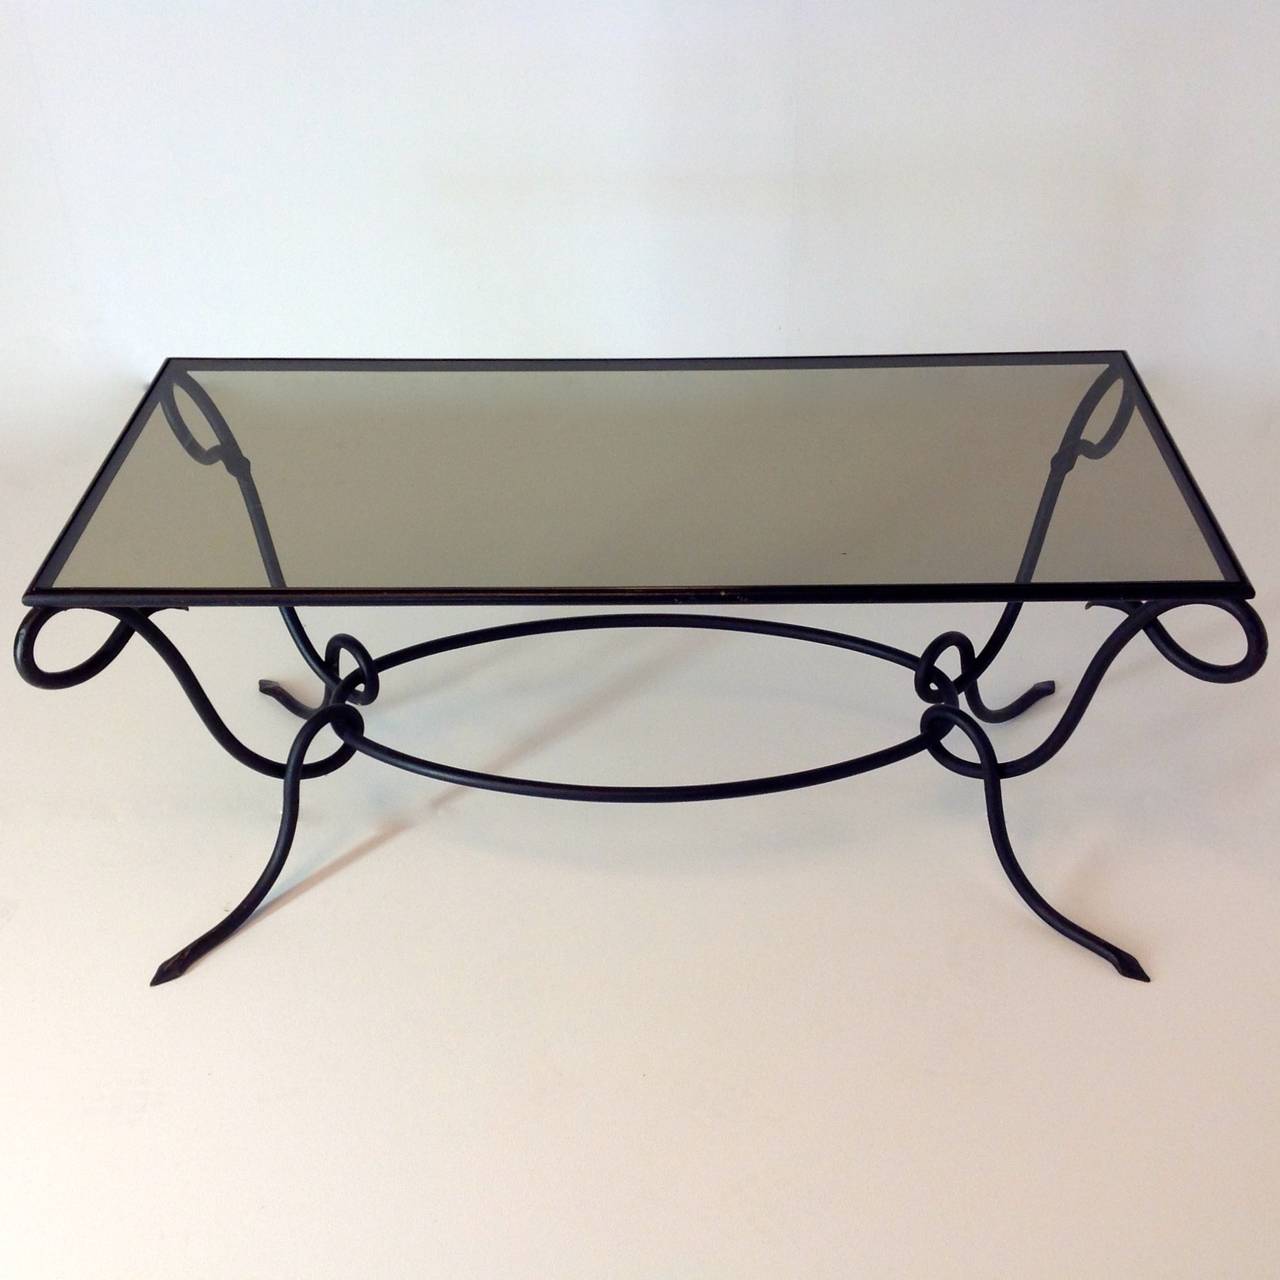 Rare and exceptional elegant coffee table design from 1940 by René Drouet
It's a model without rings and it appears that the table was repainted in black.
On some places the paint is gone, so he got just a beautiful patina.

More pictures and